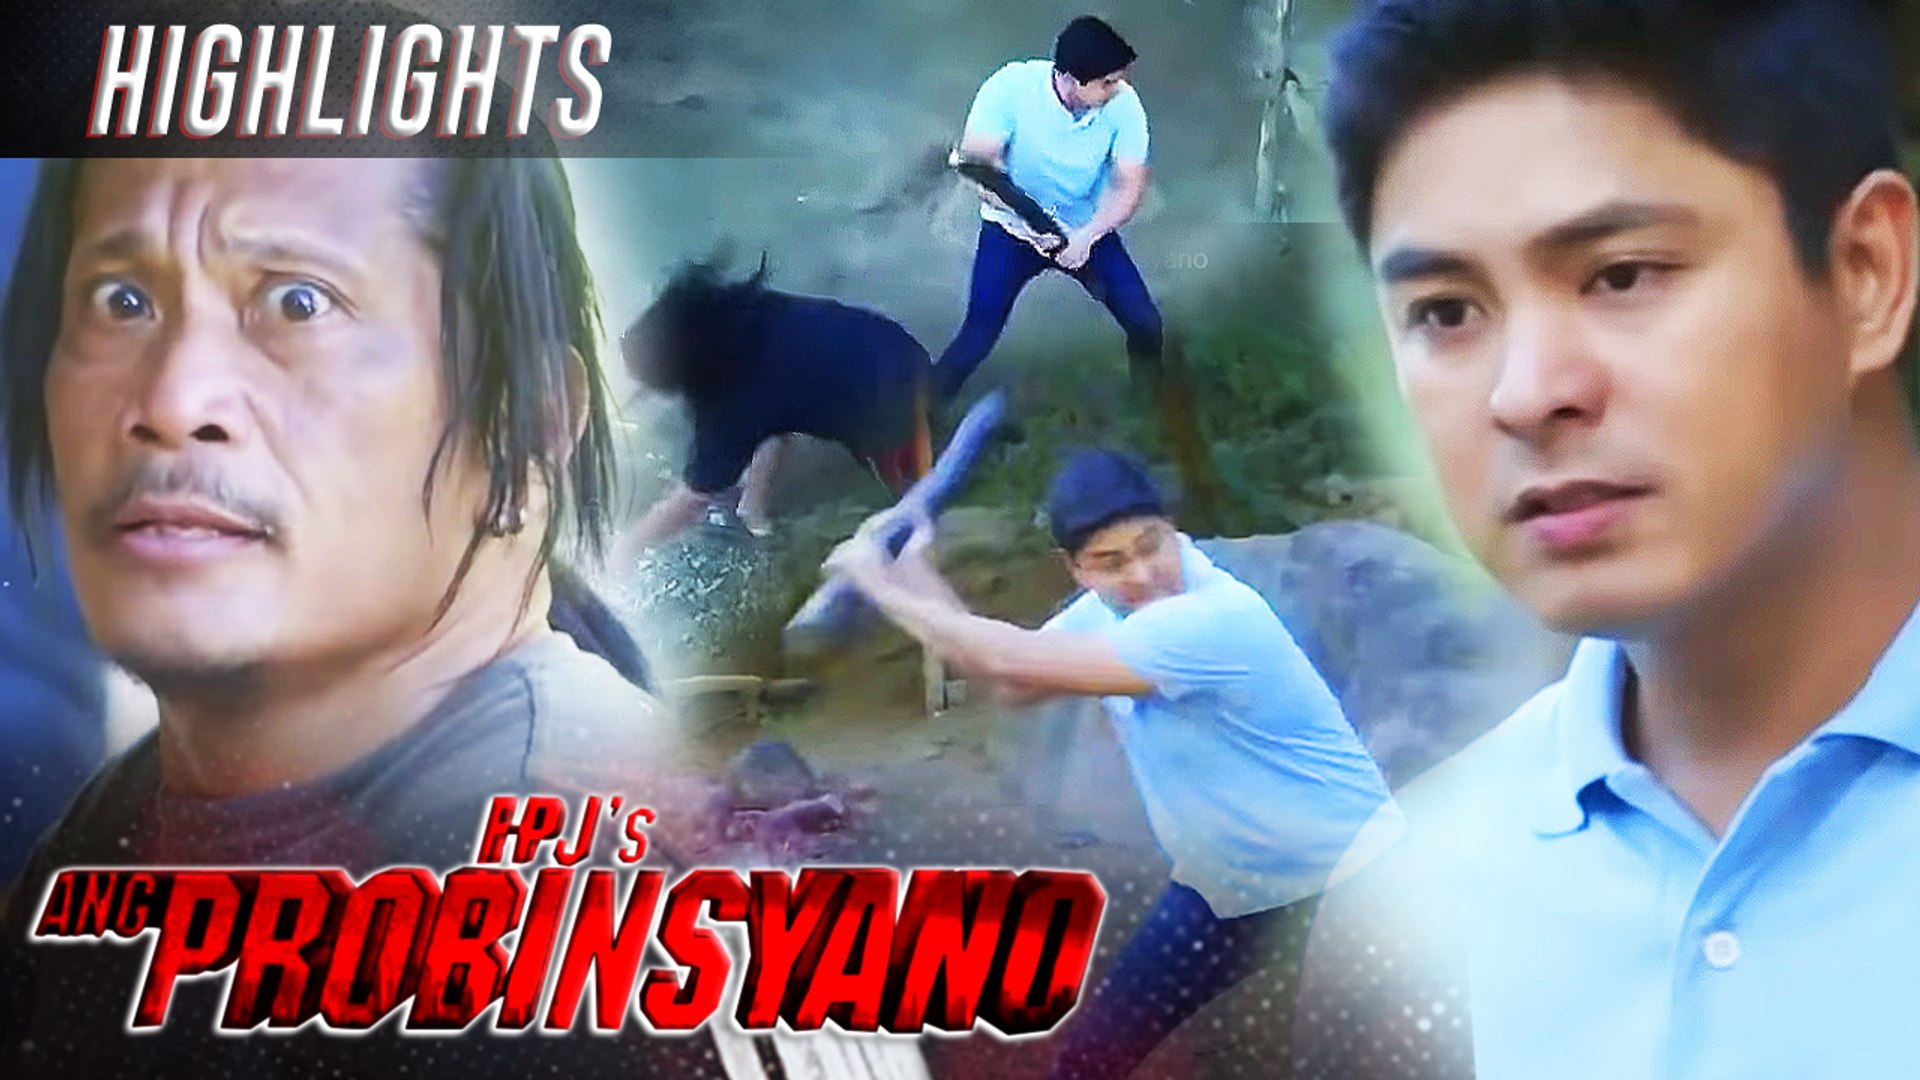 Cardo beats up the troublemakers | FPJ's Ang Probinsyano